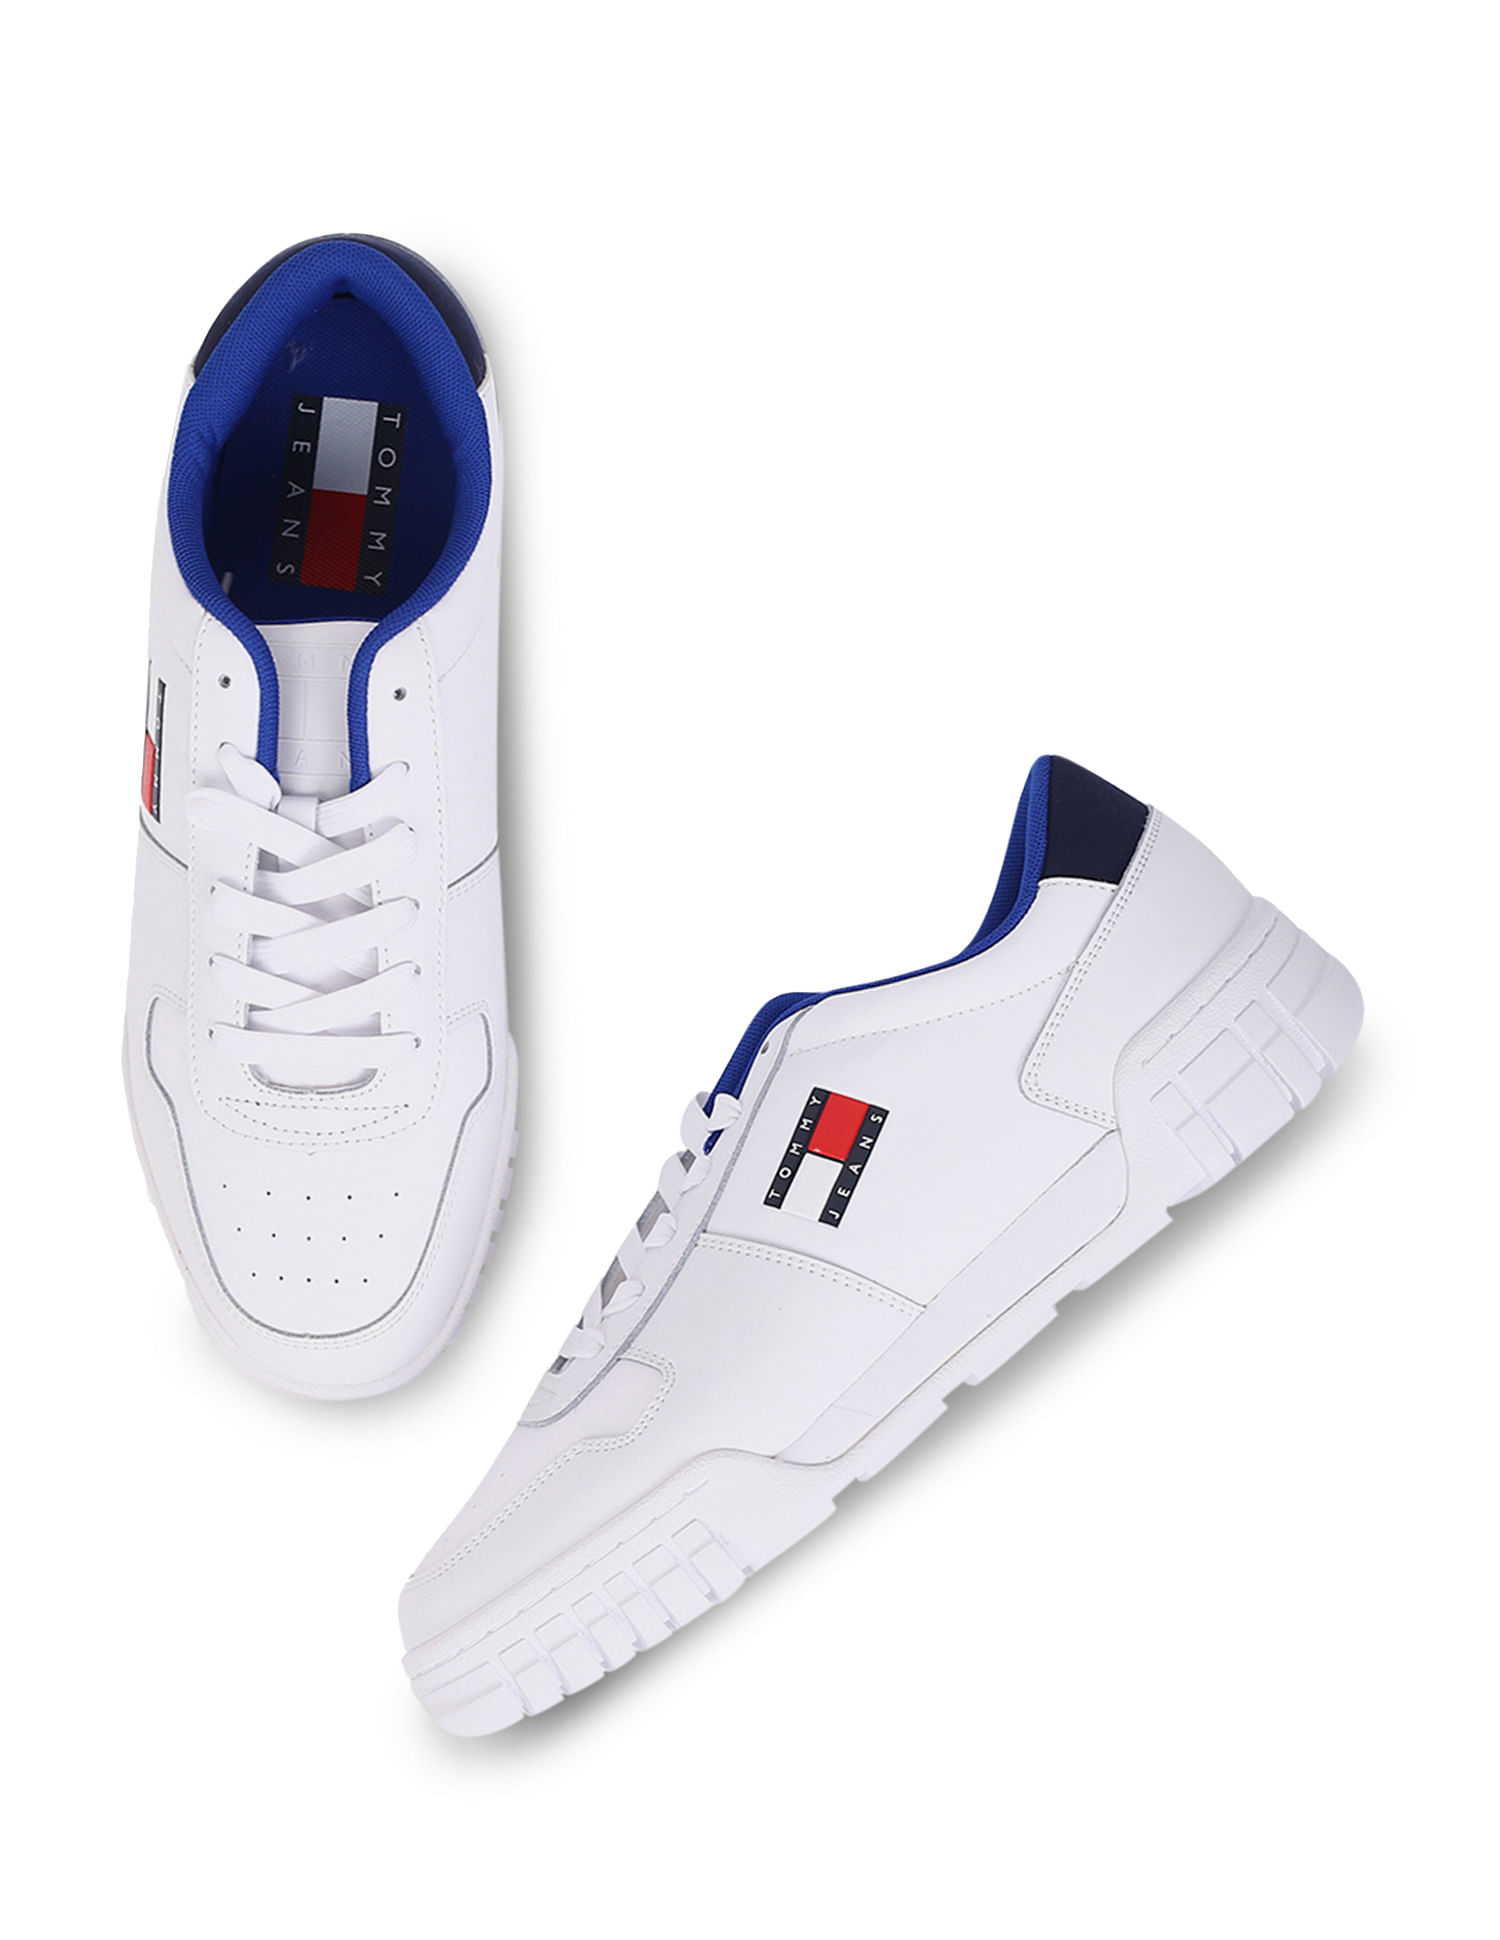 Tommy Hilfiger Retro Sneakers - NNNOW.com